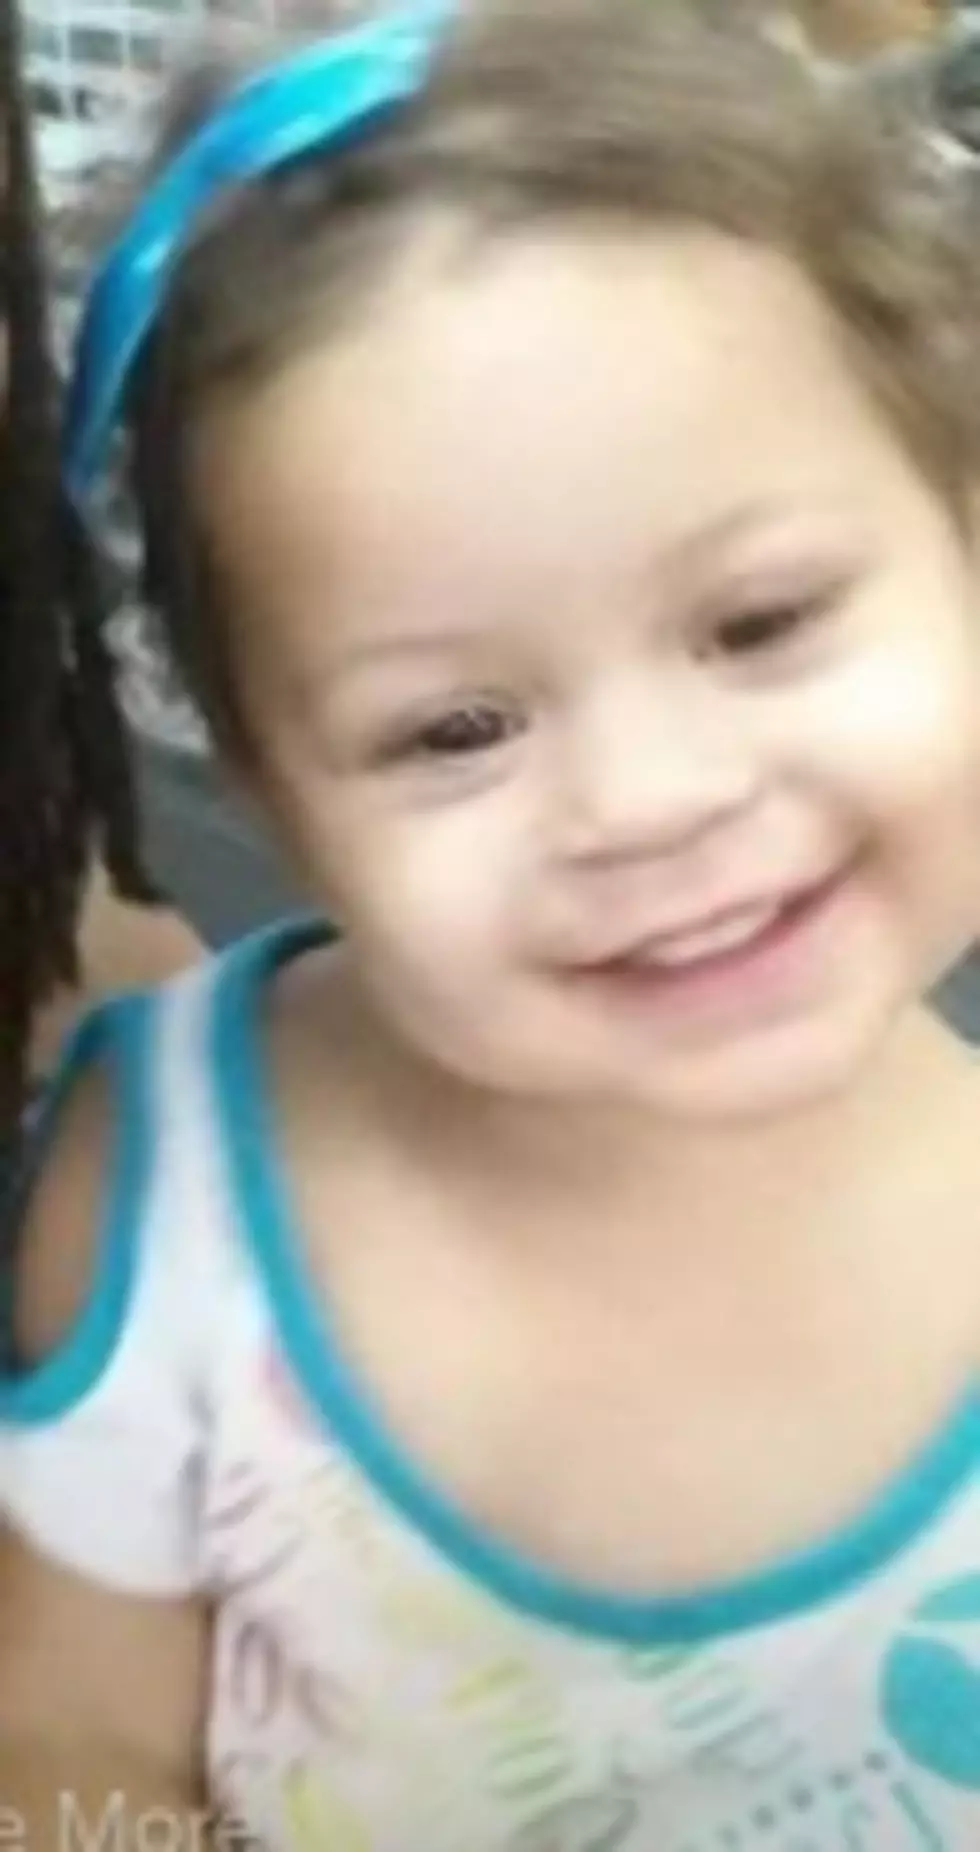 Police Searching For Missing Toddler After Mother Found Dead